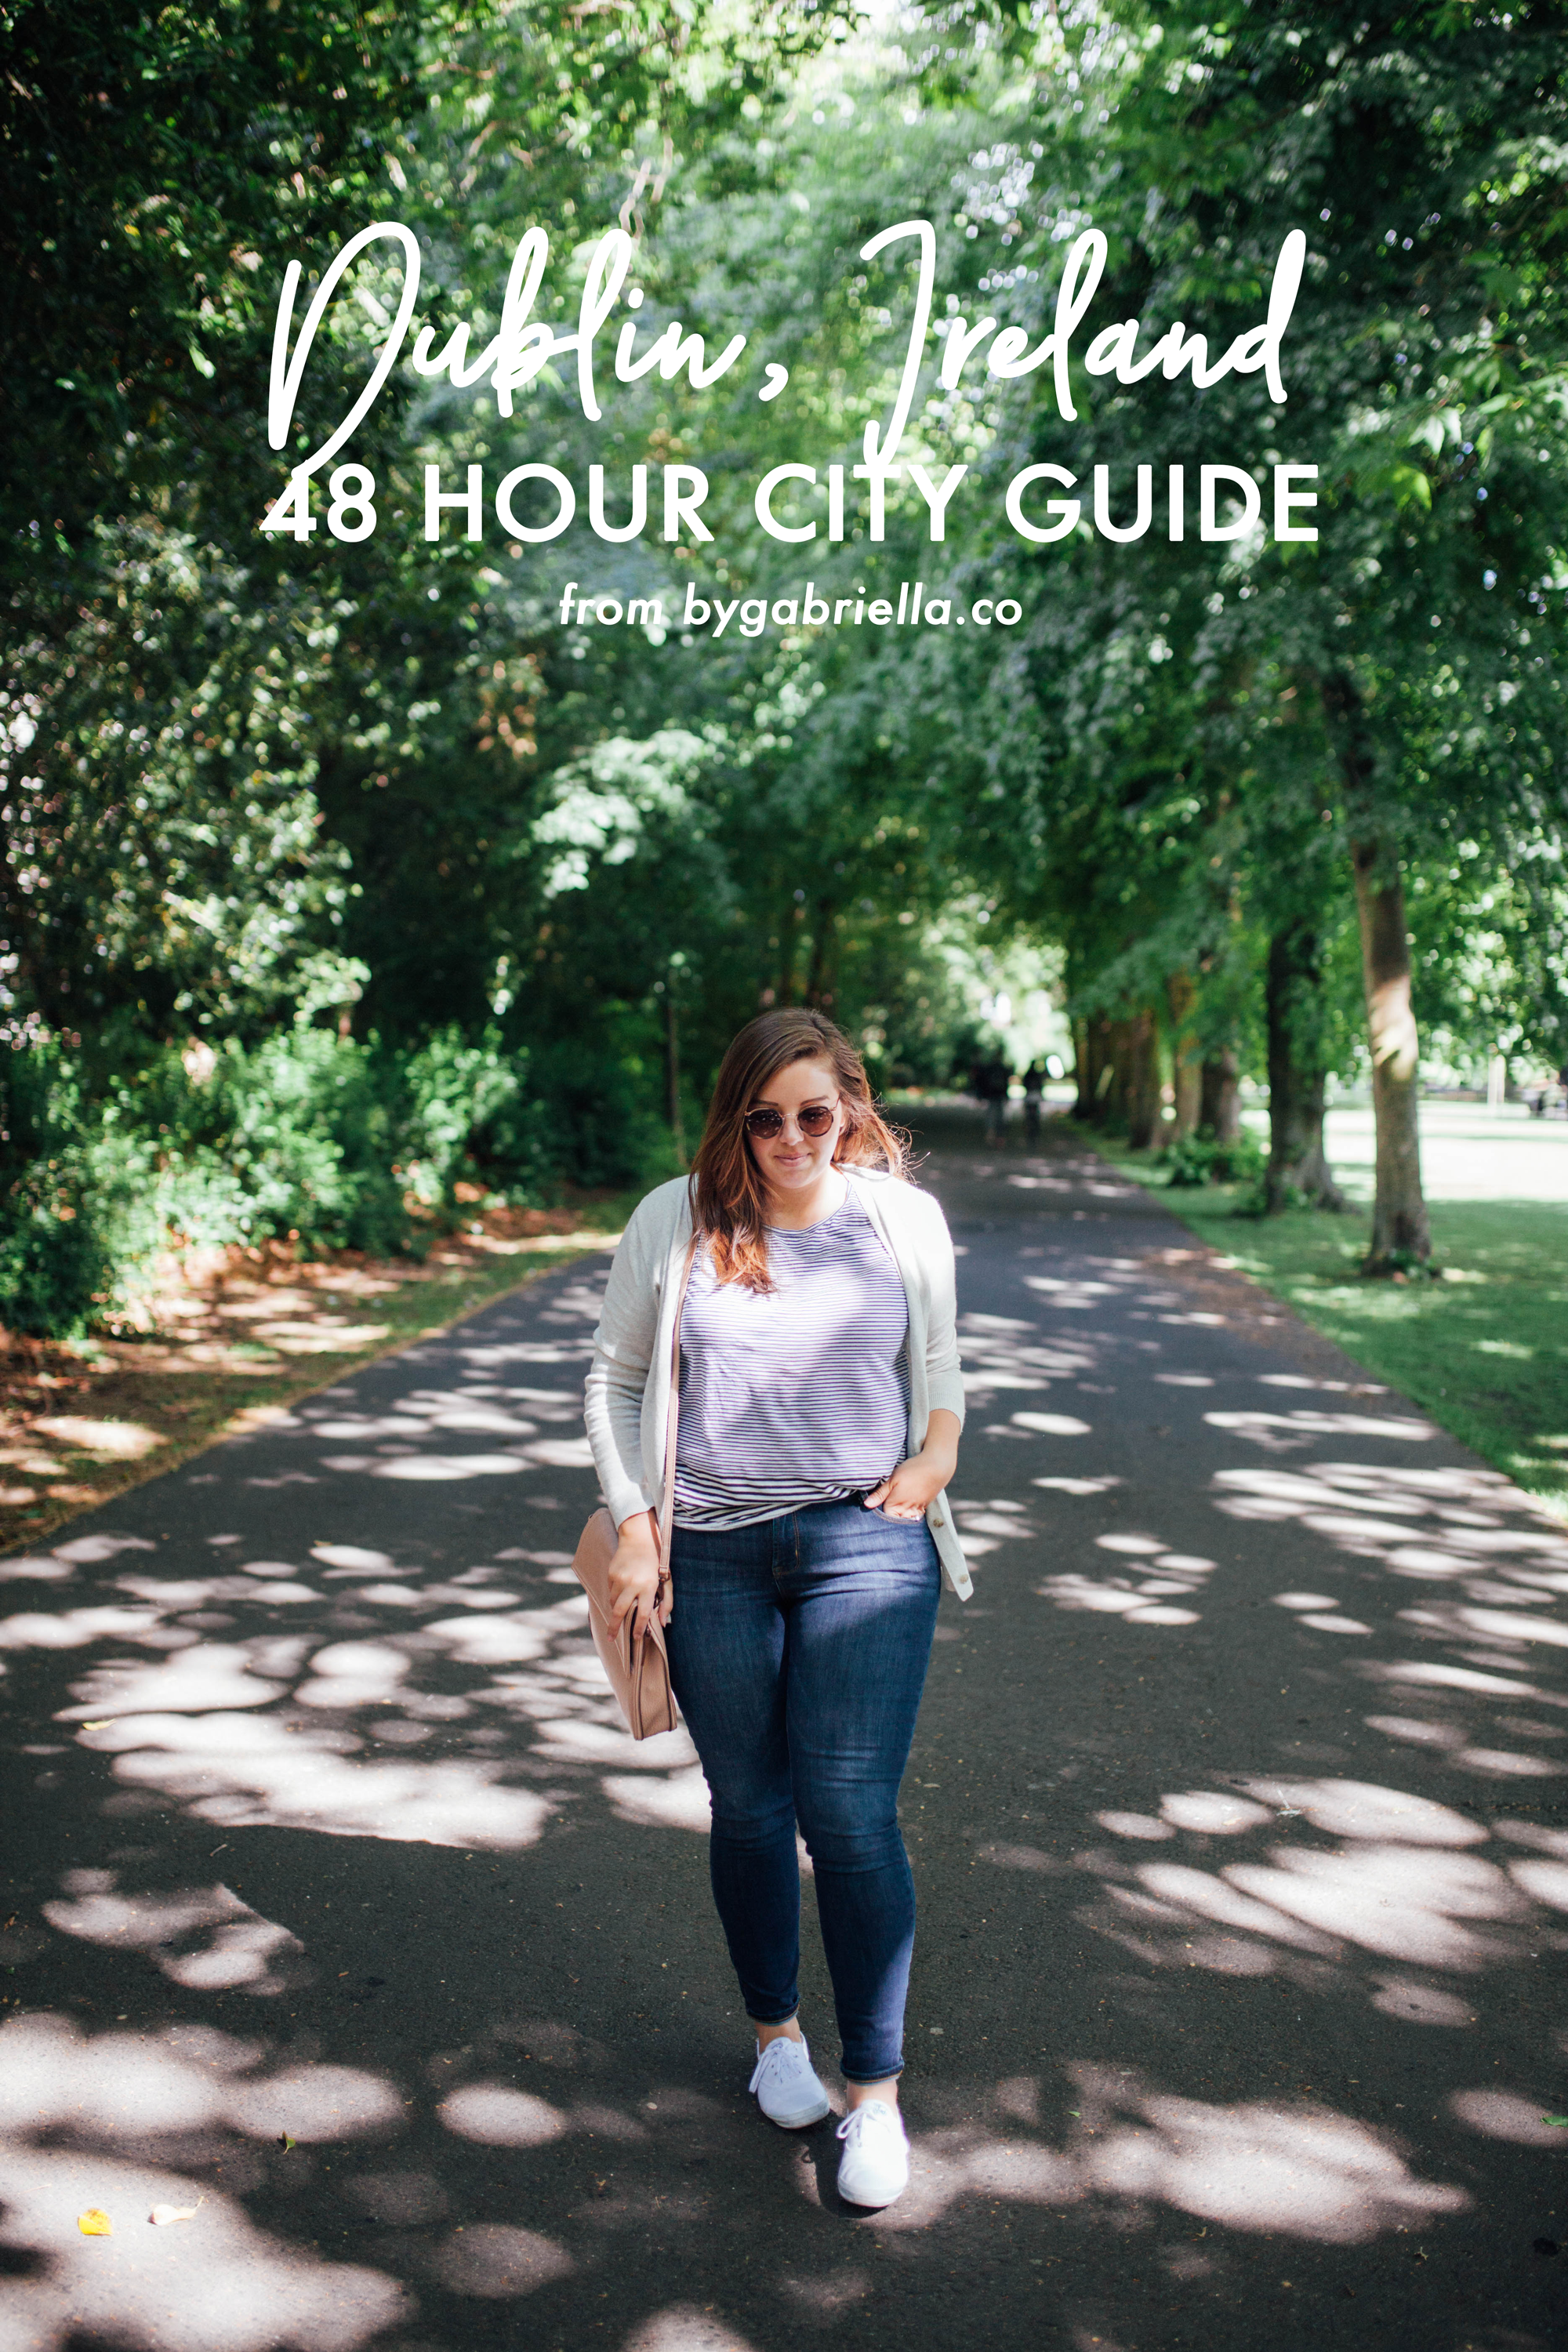 Dublin, Ireland: 48 hour city guide with recommendations for where to eat, where to stay, where to drink, and more! #ad | bygabriella.co